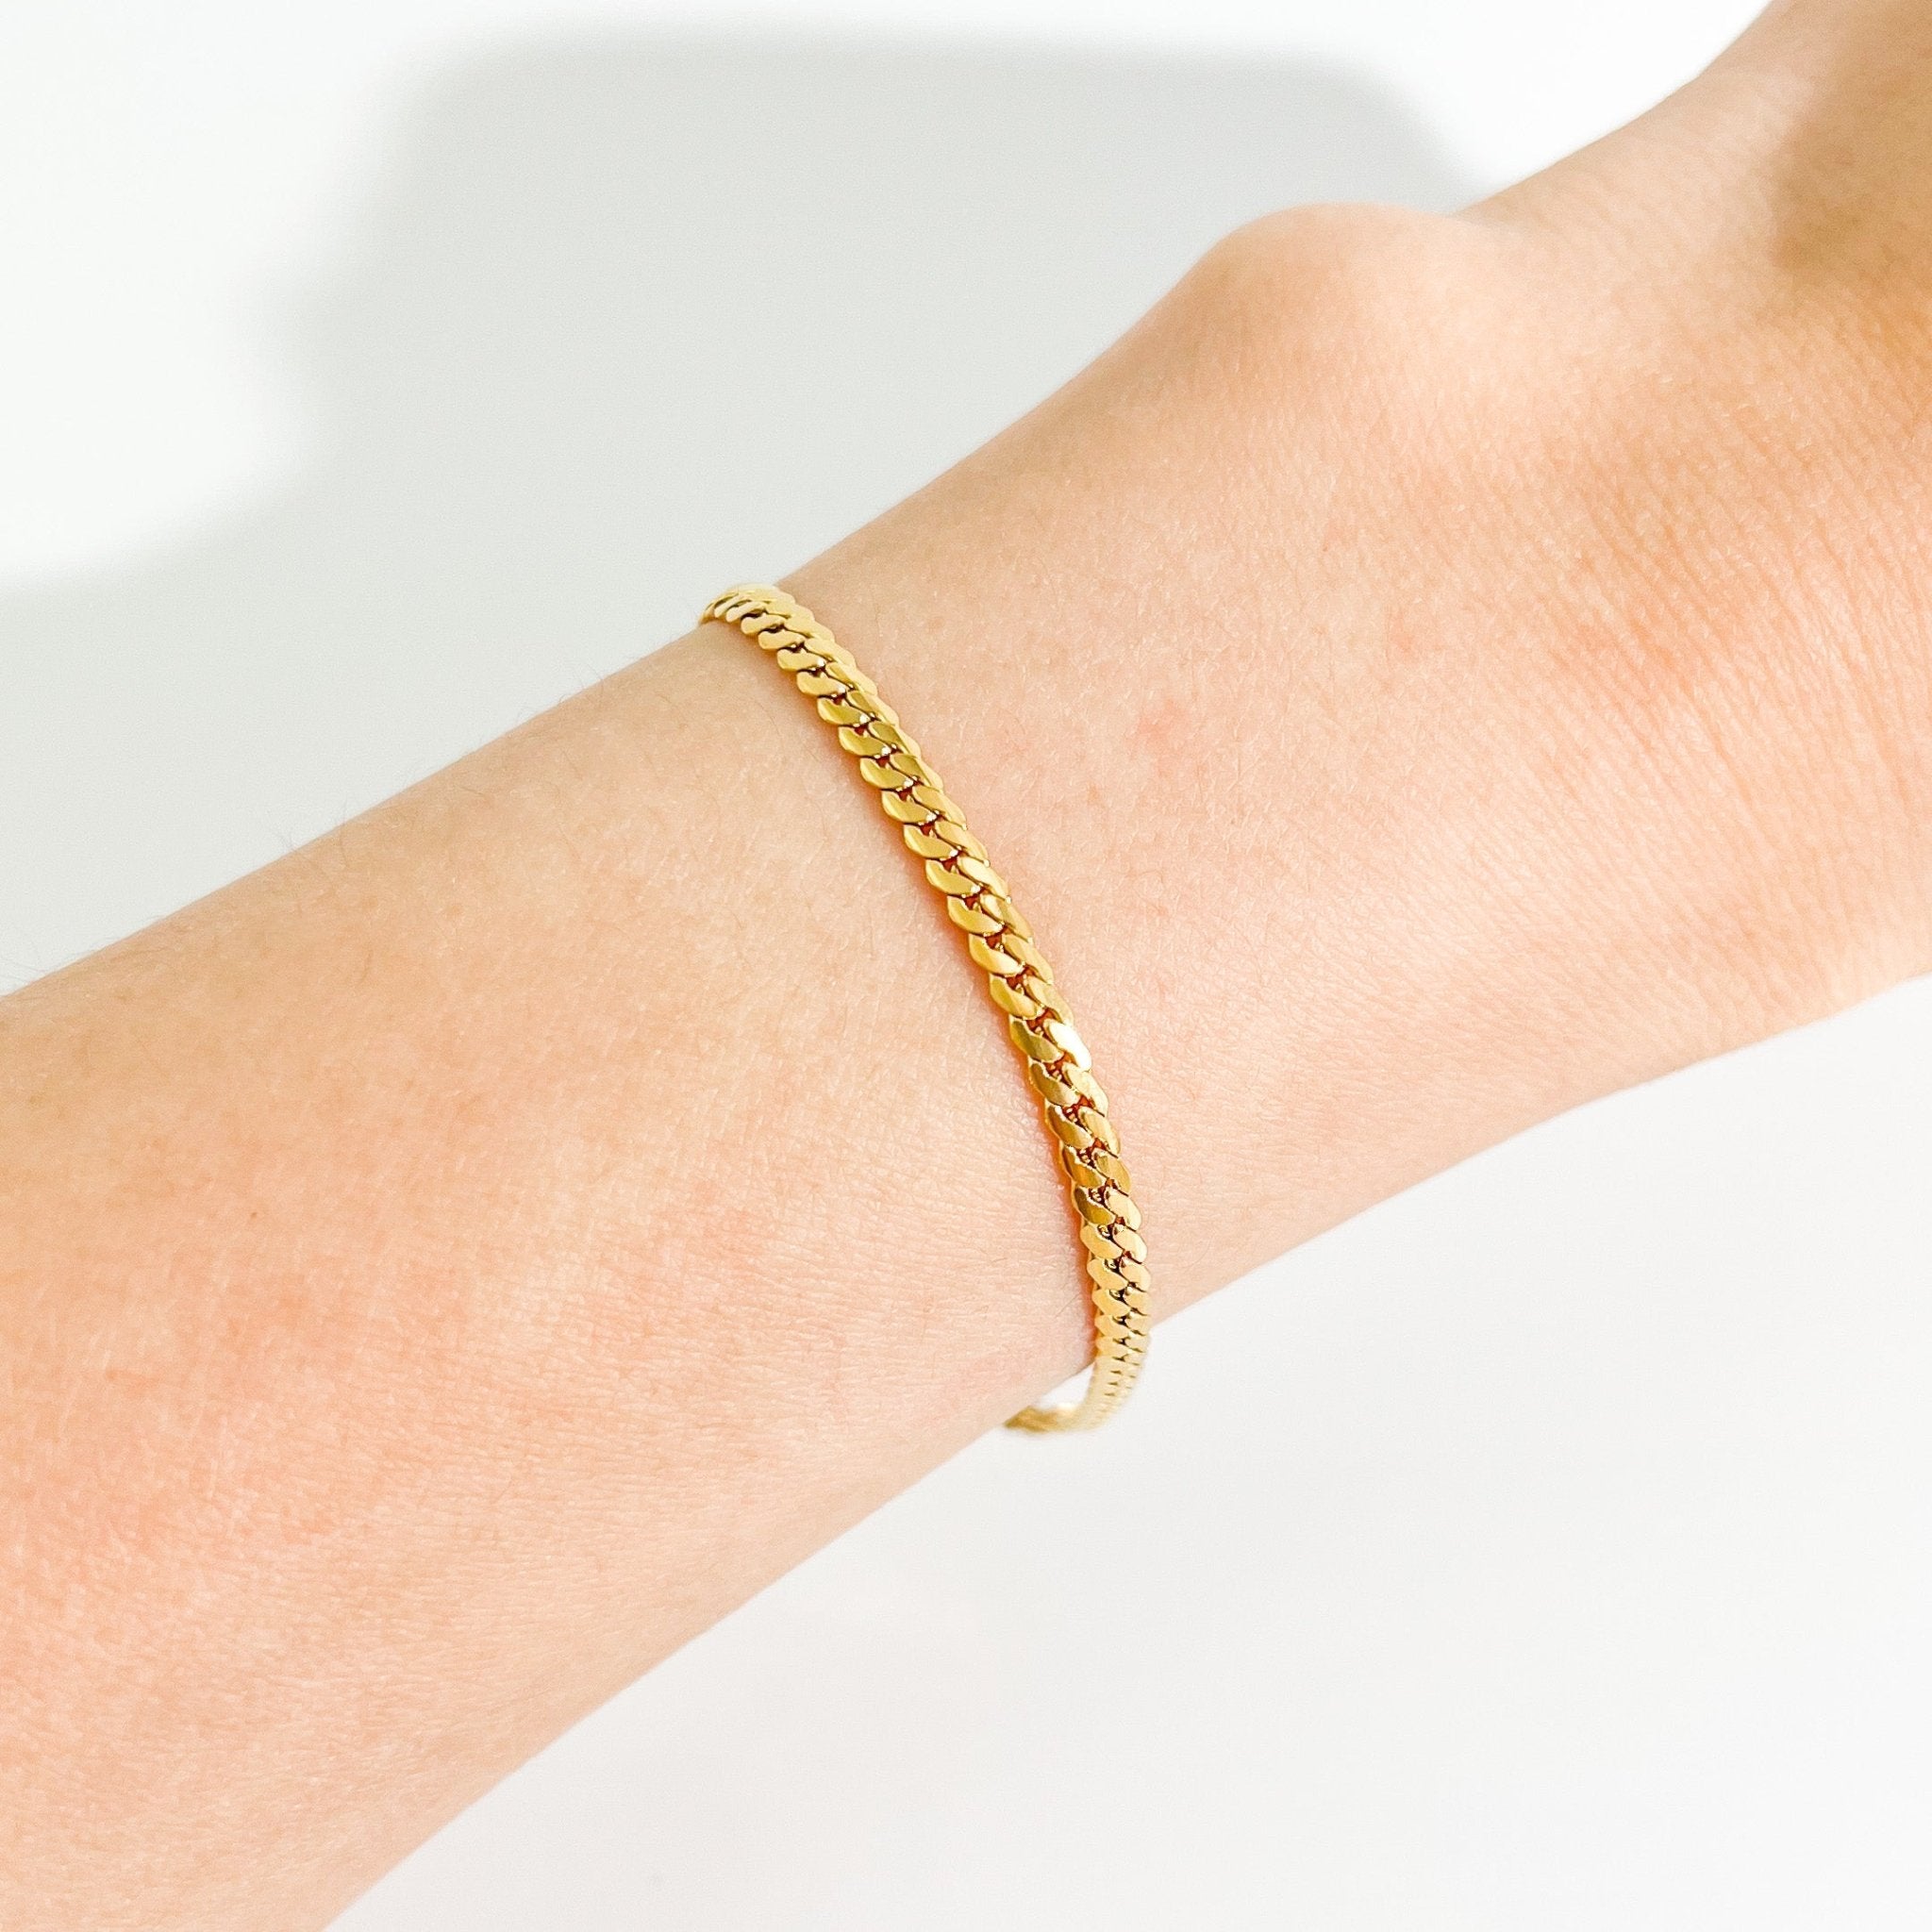 Alexis Chain Bracelet in Gold - Flaire & Co.